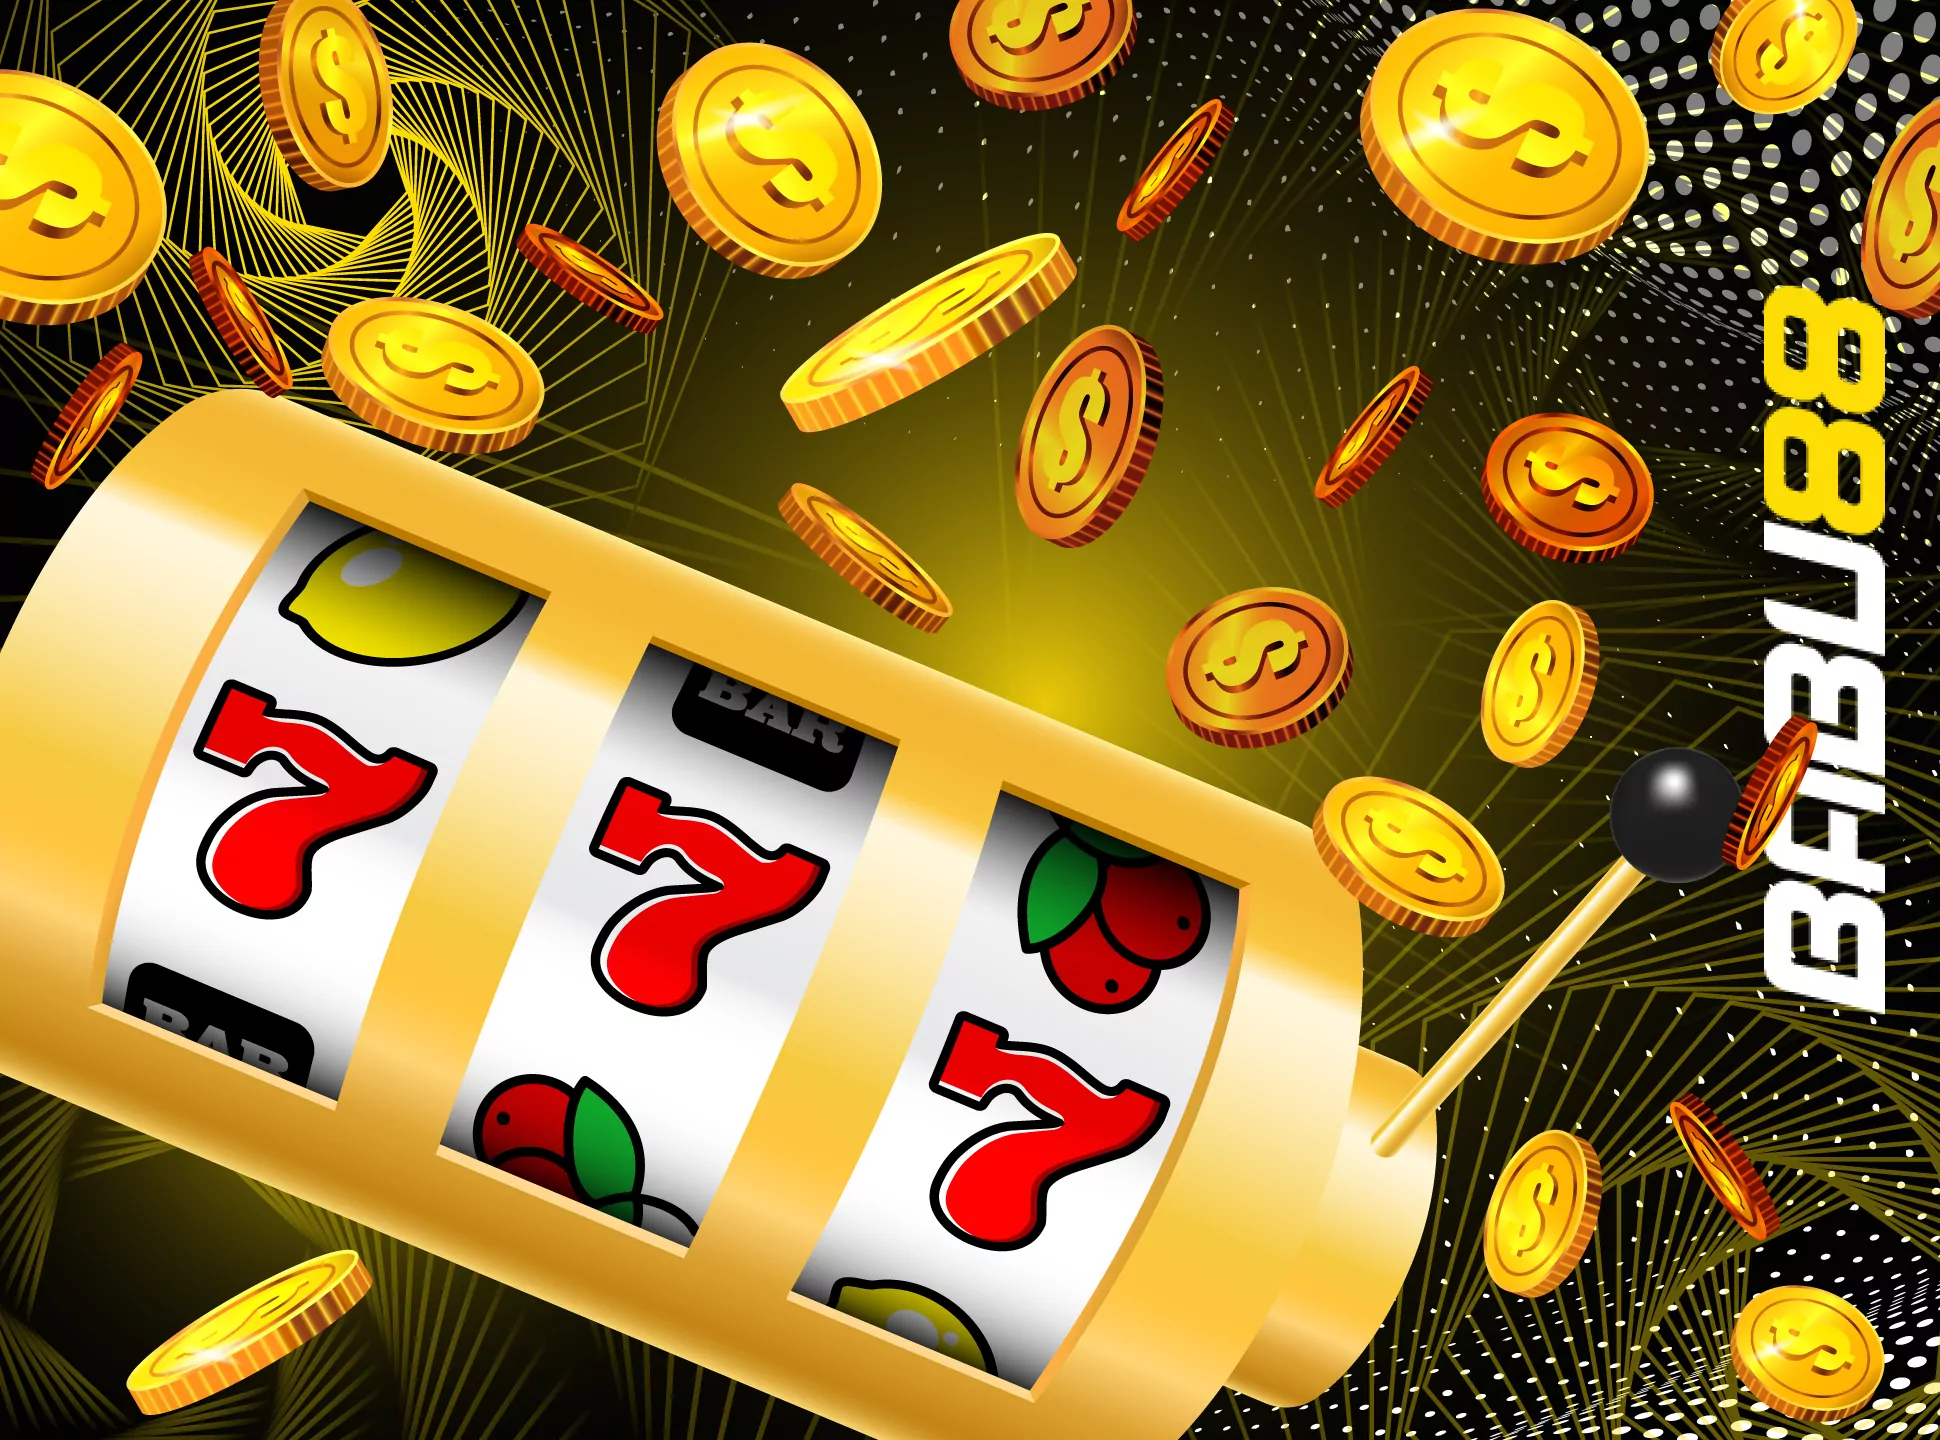 Casino lovers can receive the slots bonus of up to 18.000 BDT.